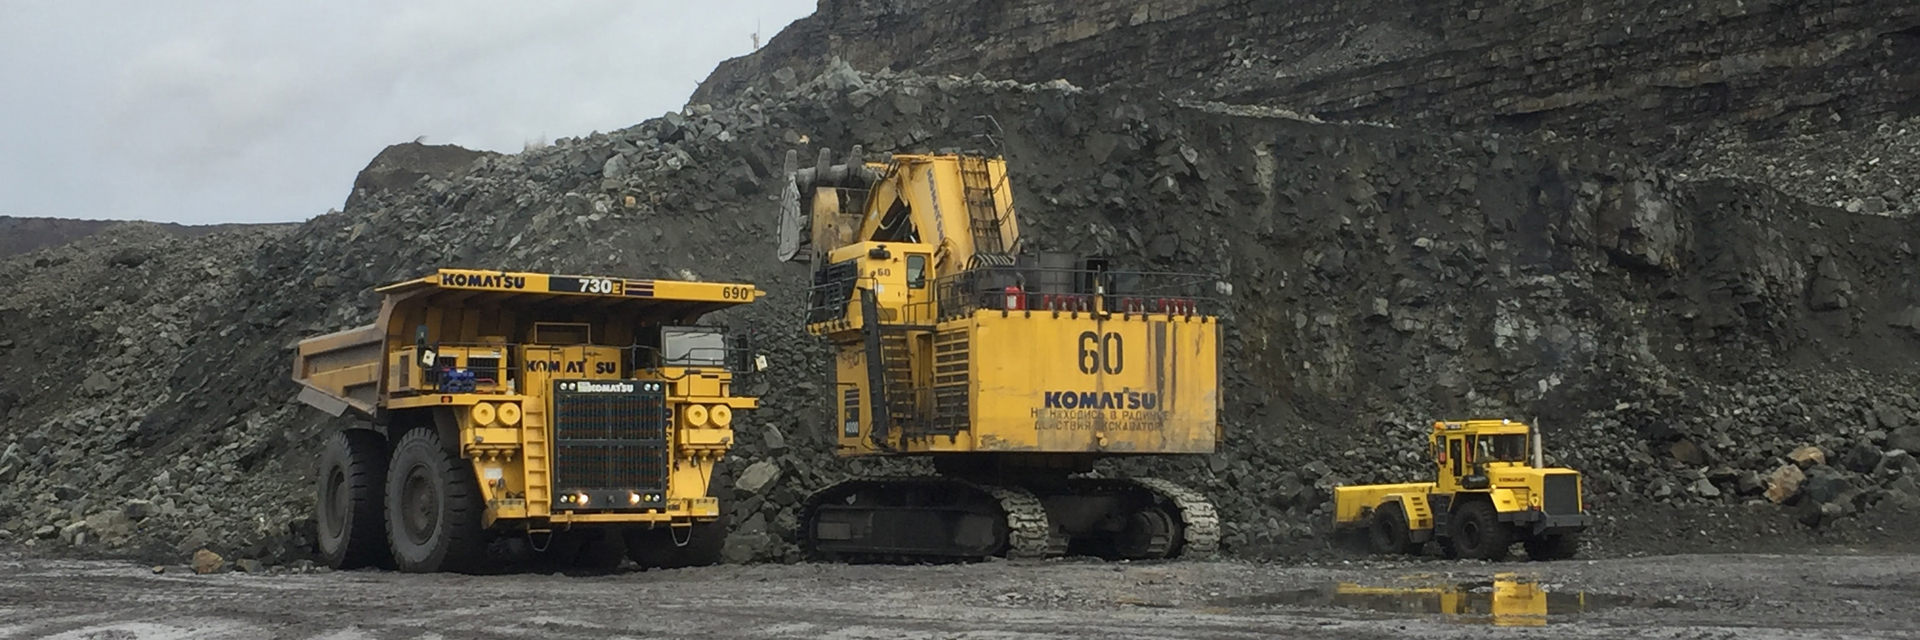 Diesel Testing mine site diggers and trucks banner image